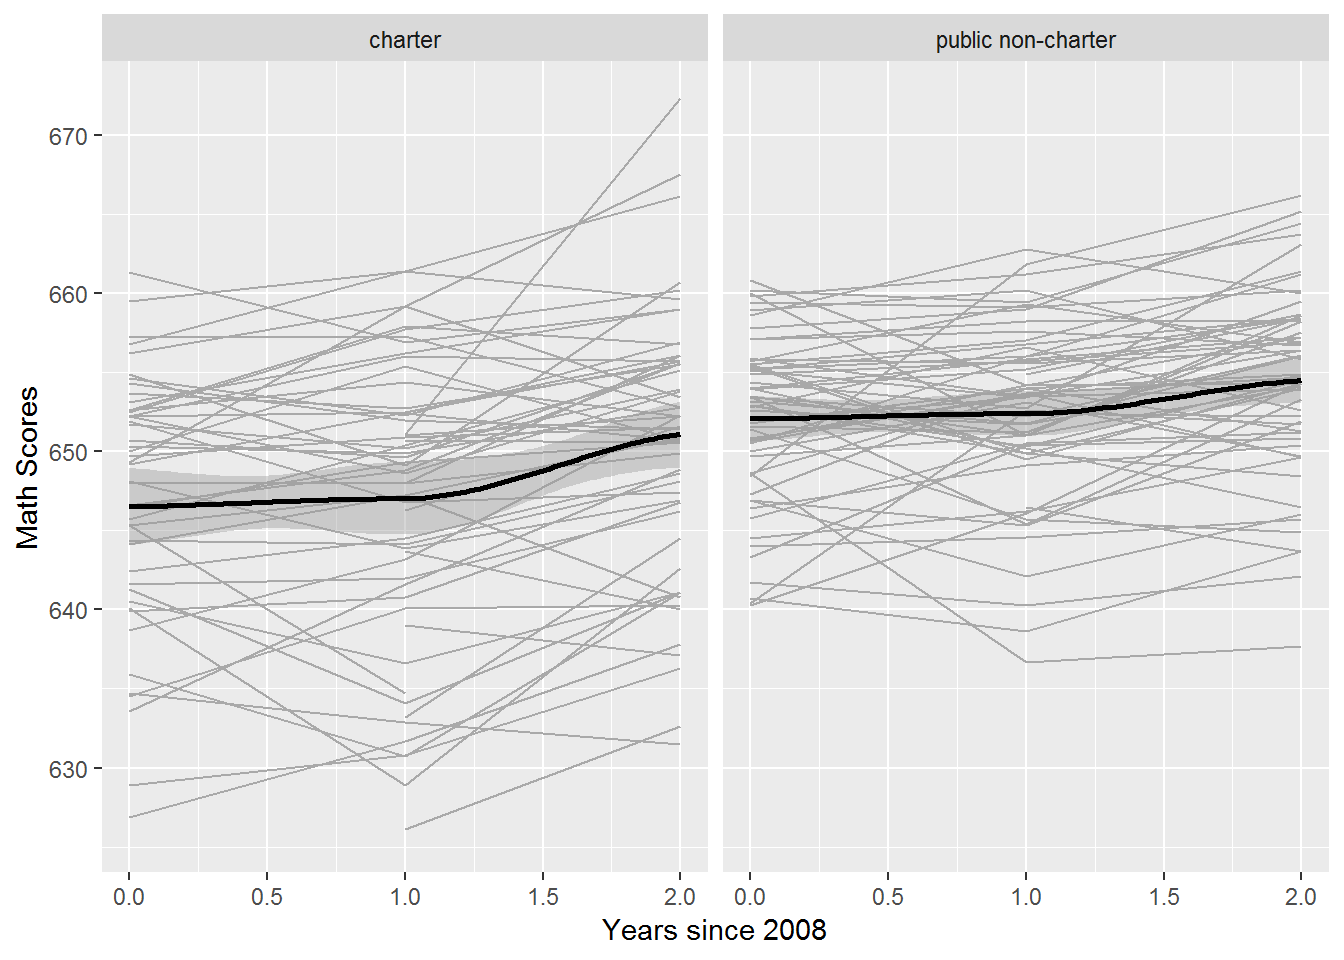 Spaghetti plot showing time trends for each school by school type, for a random sample of charter schools (left) and public non-charter schools (right), with overall fits using loess (bold).